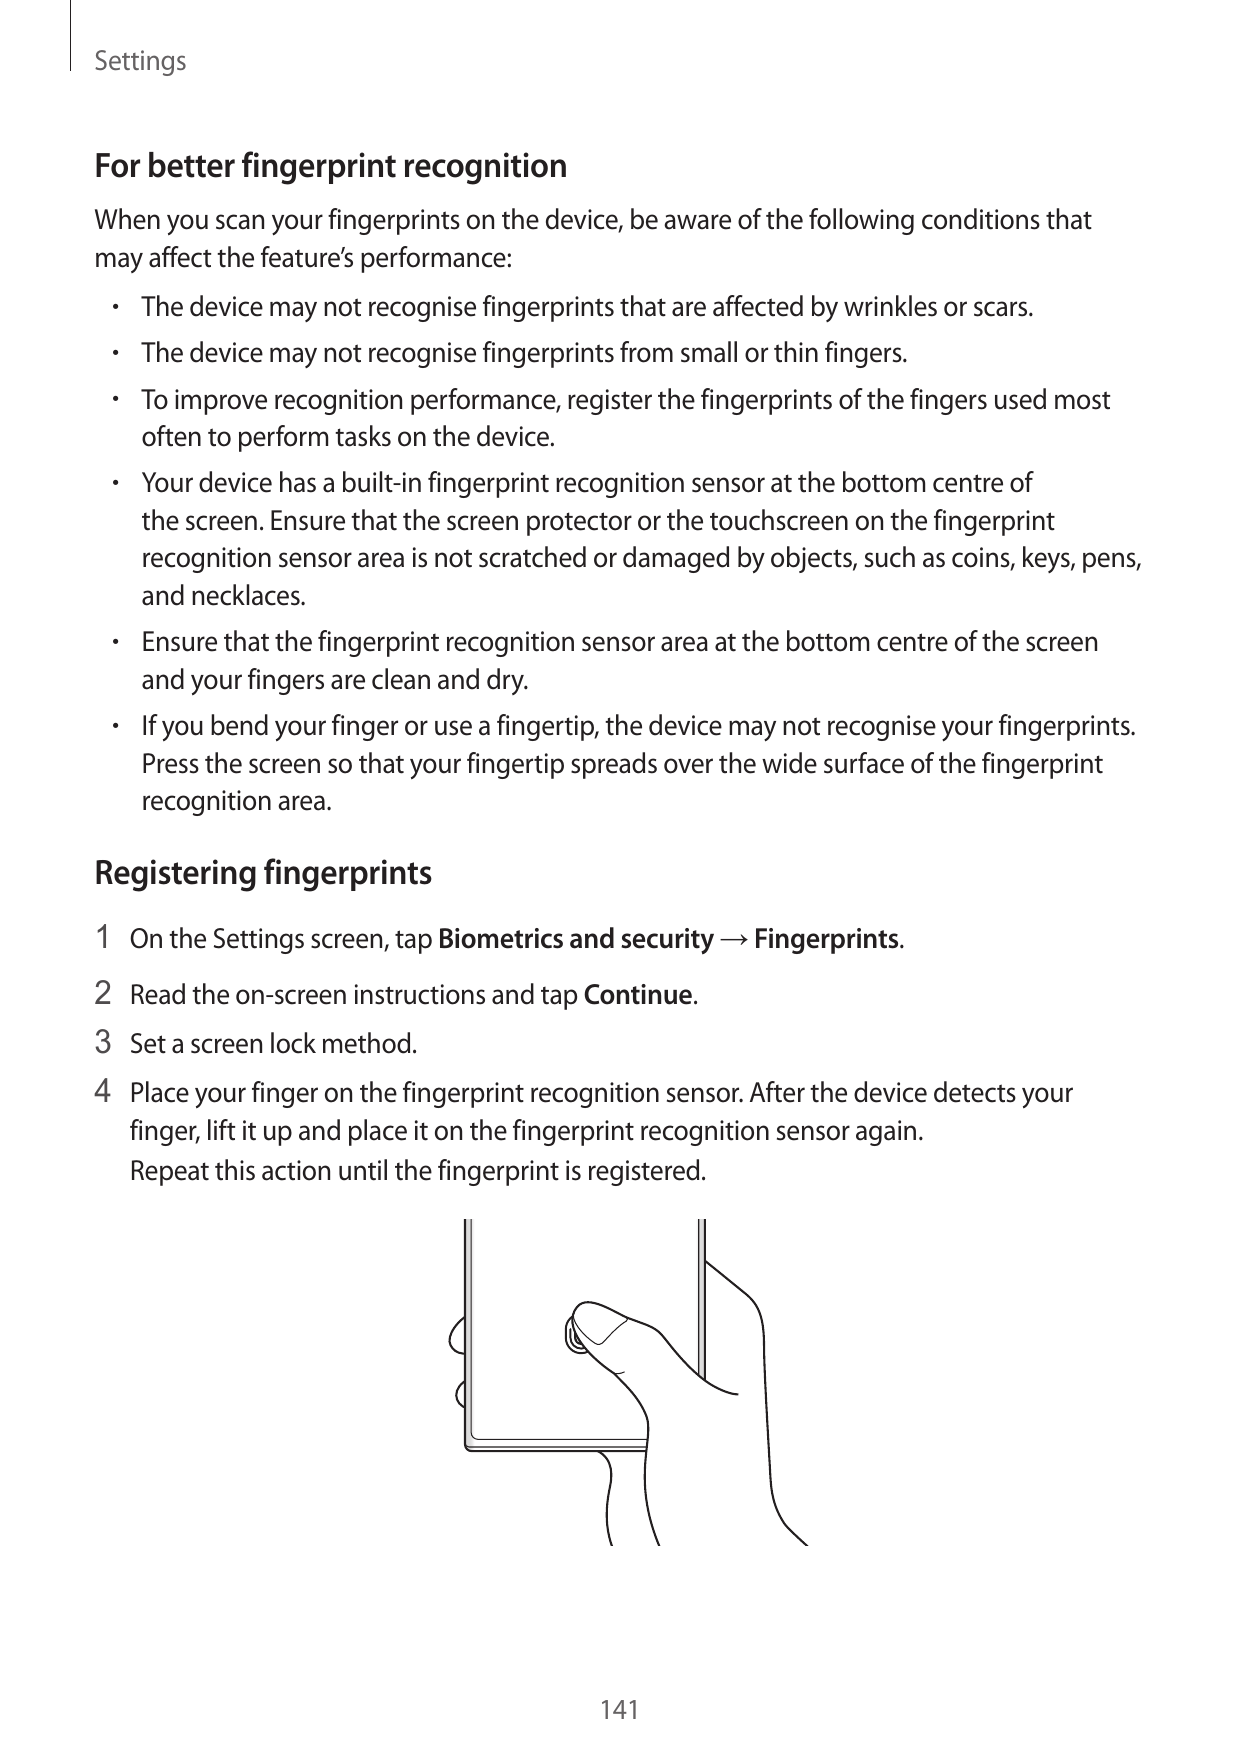 SettingsFor better fingerprint recognitionWhen you scan your fingerprints on the device, be aware of the following conditions th